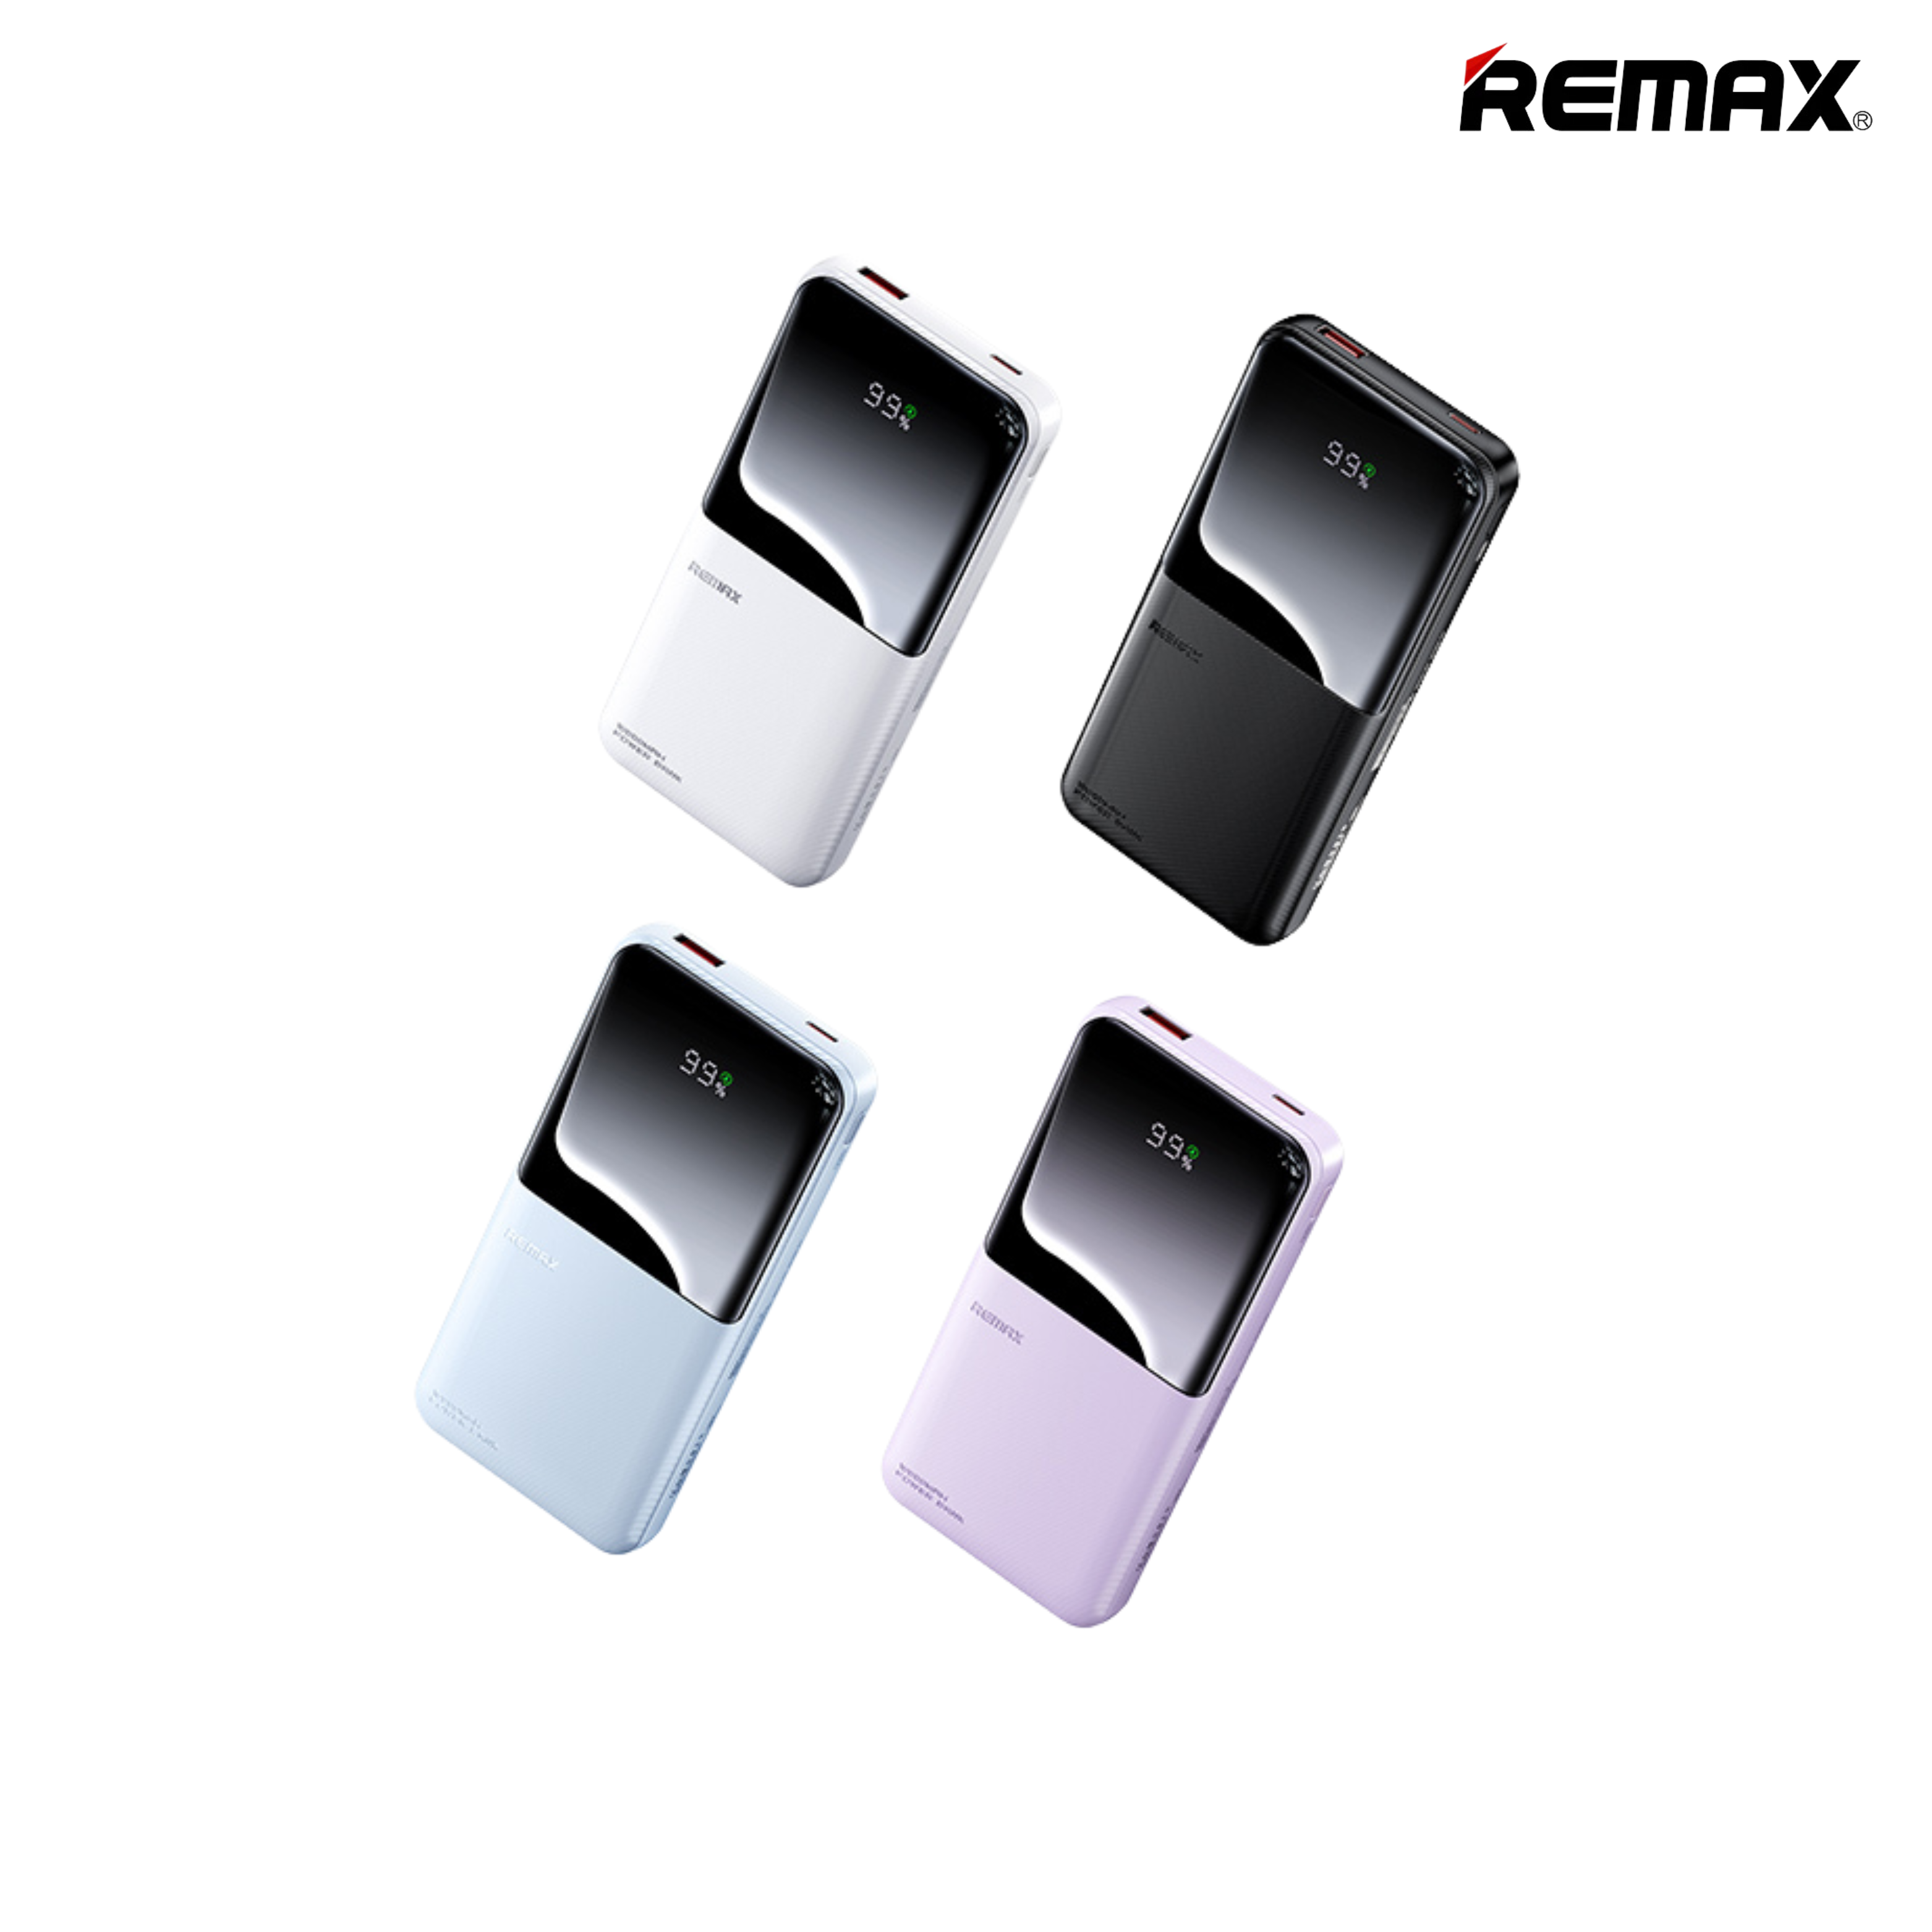 REMAX RPP-679 10000MAH CYNLLE SERIES 20W+22.5W POWER BANK WITH 2 FAST CHARGING CABLE(Purple)